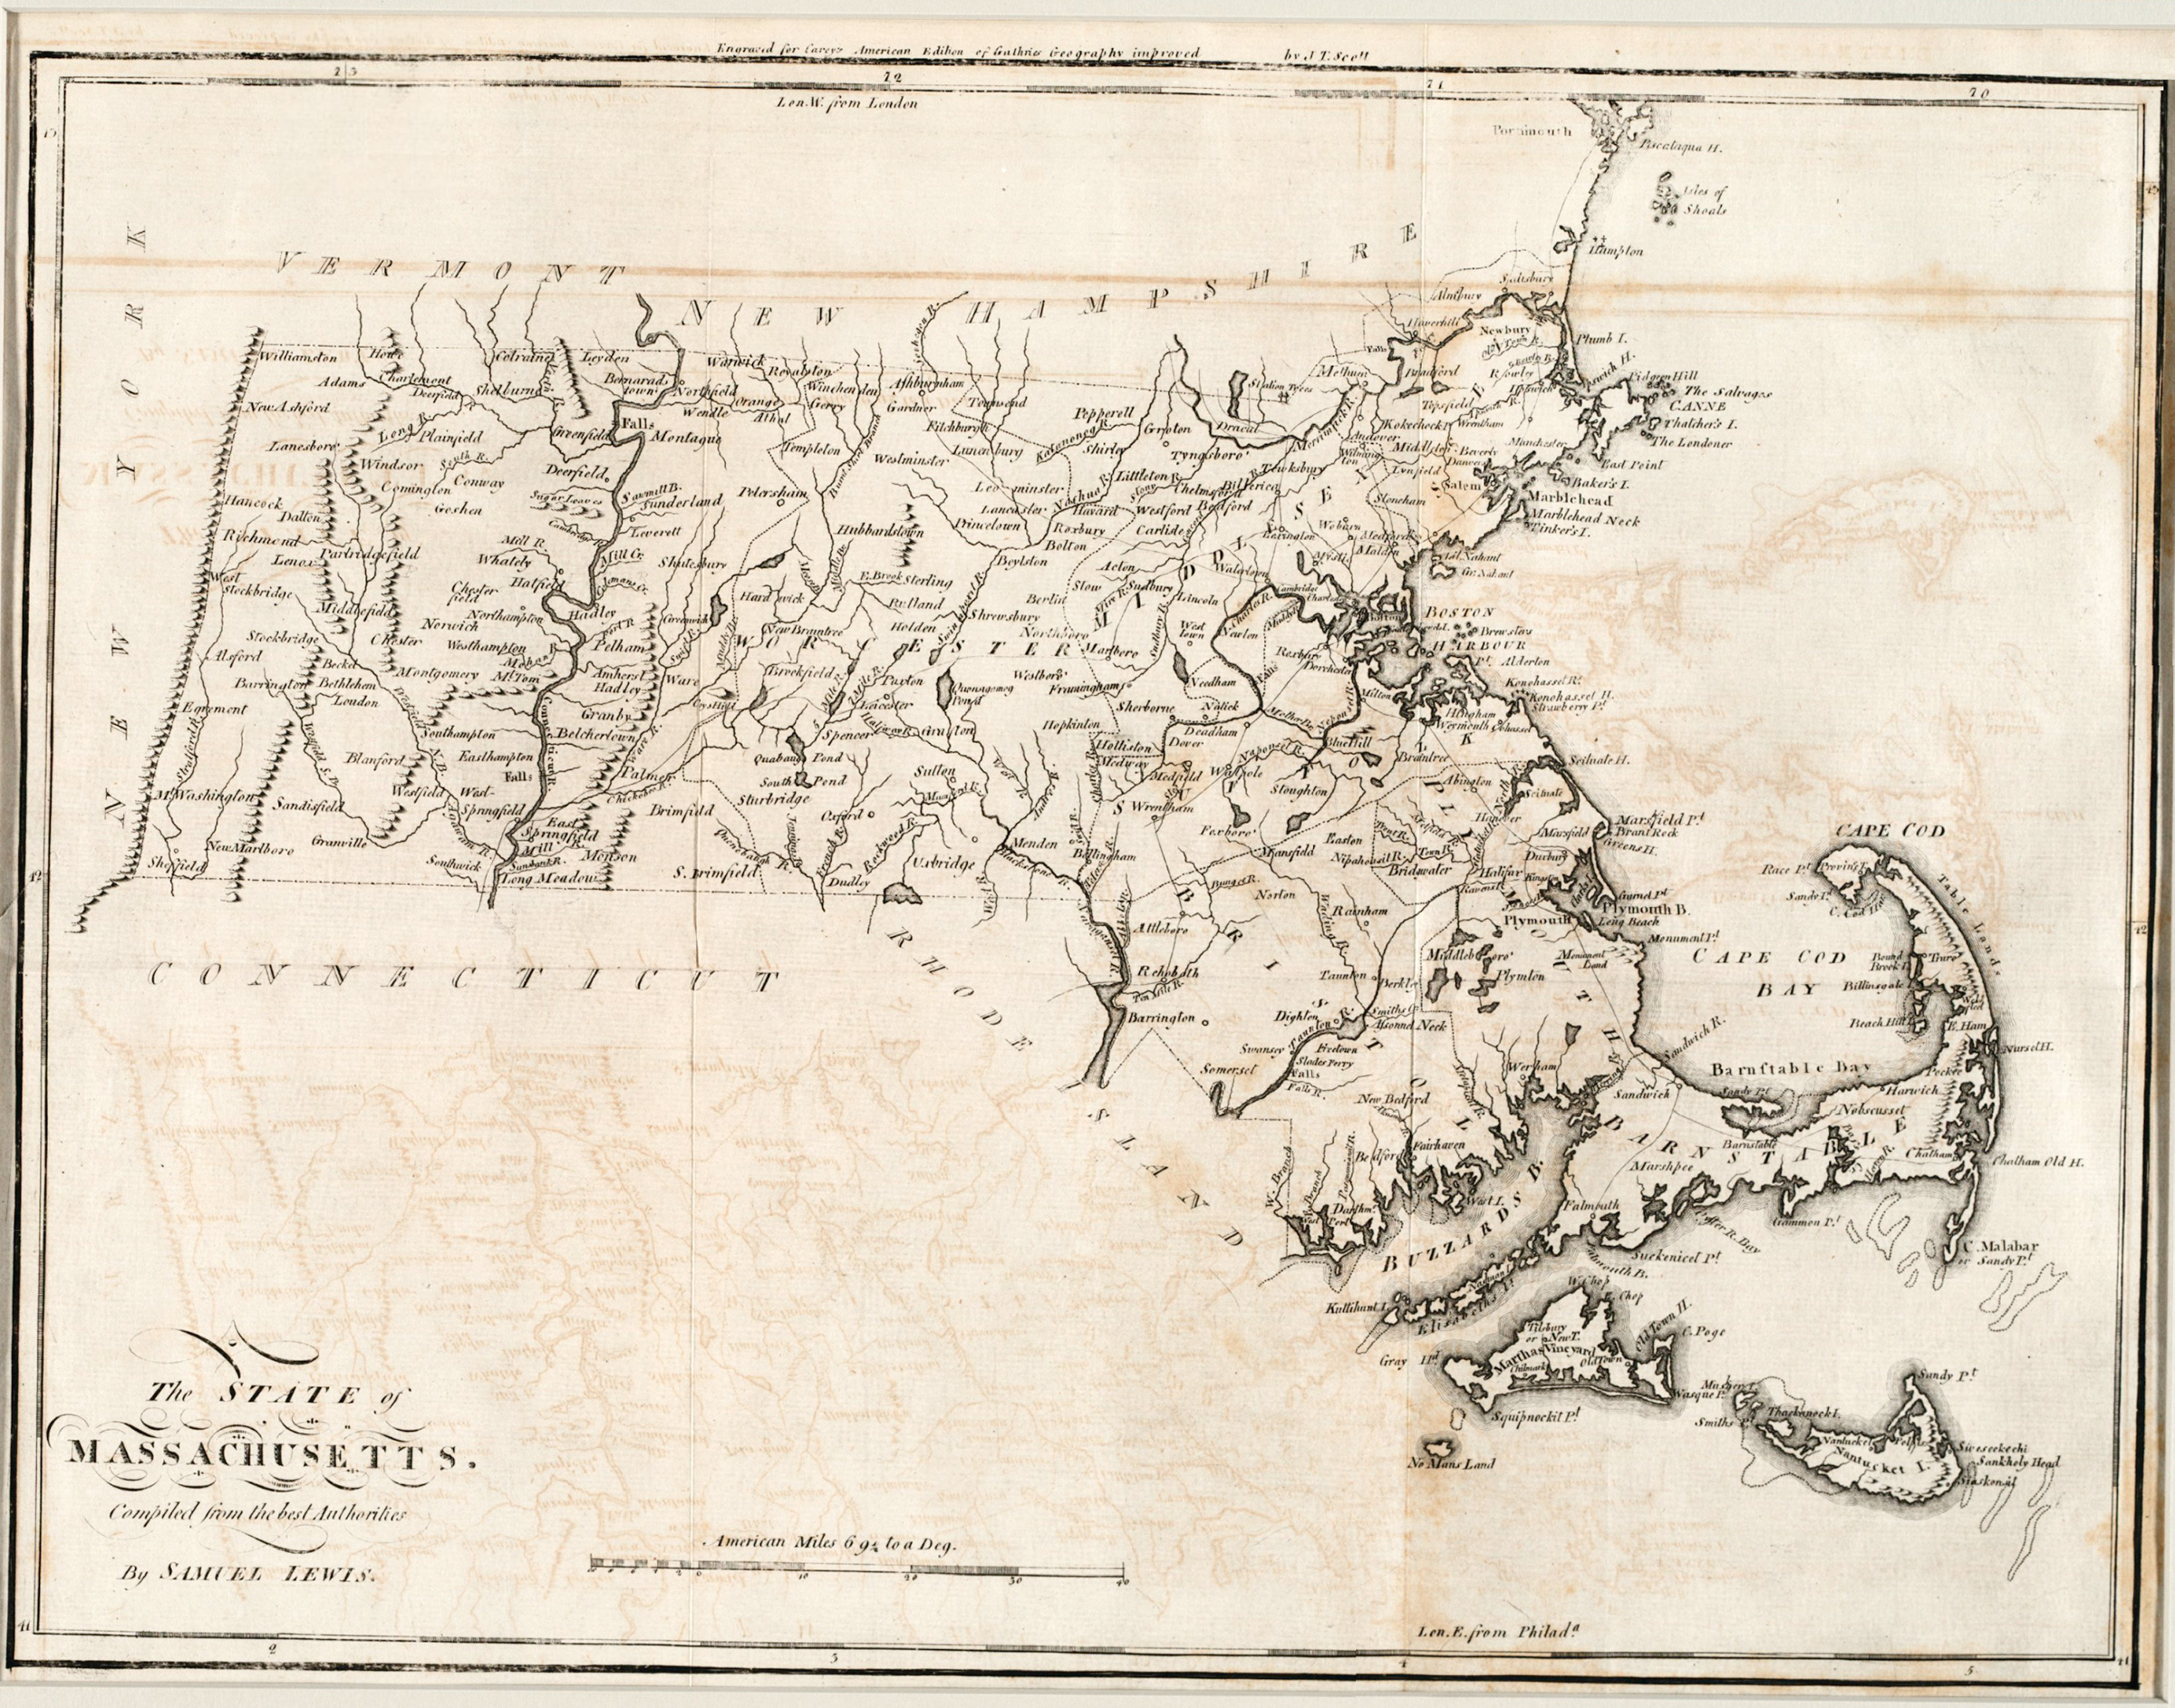 map of Massachusetts in 1795 by Samuel Lewis